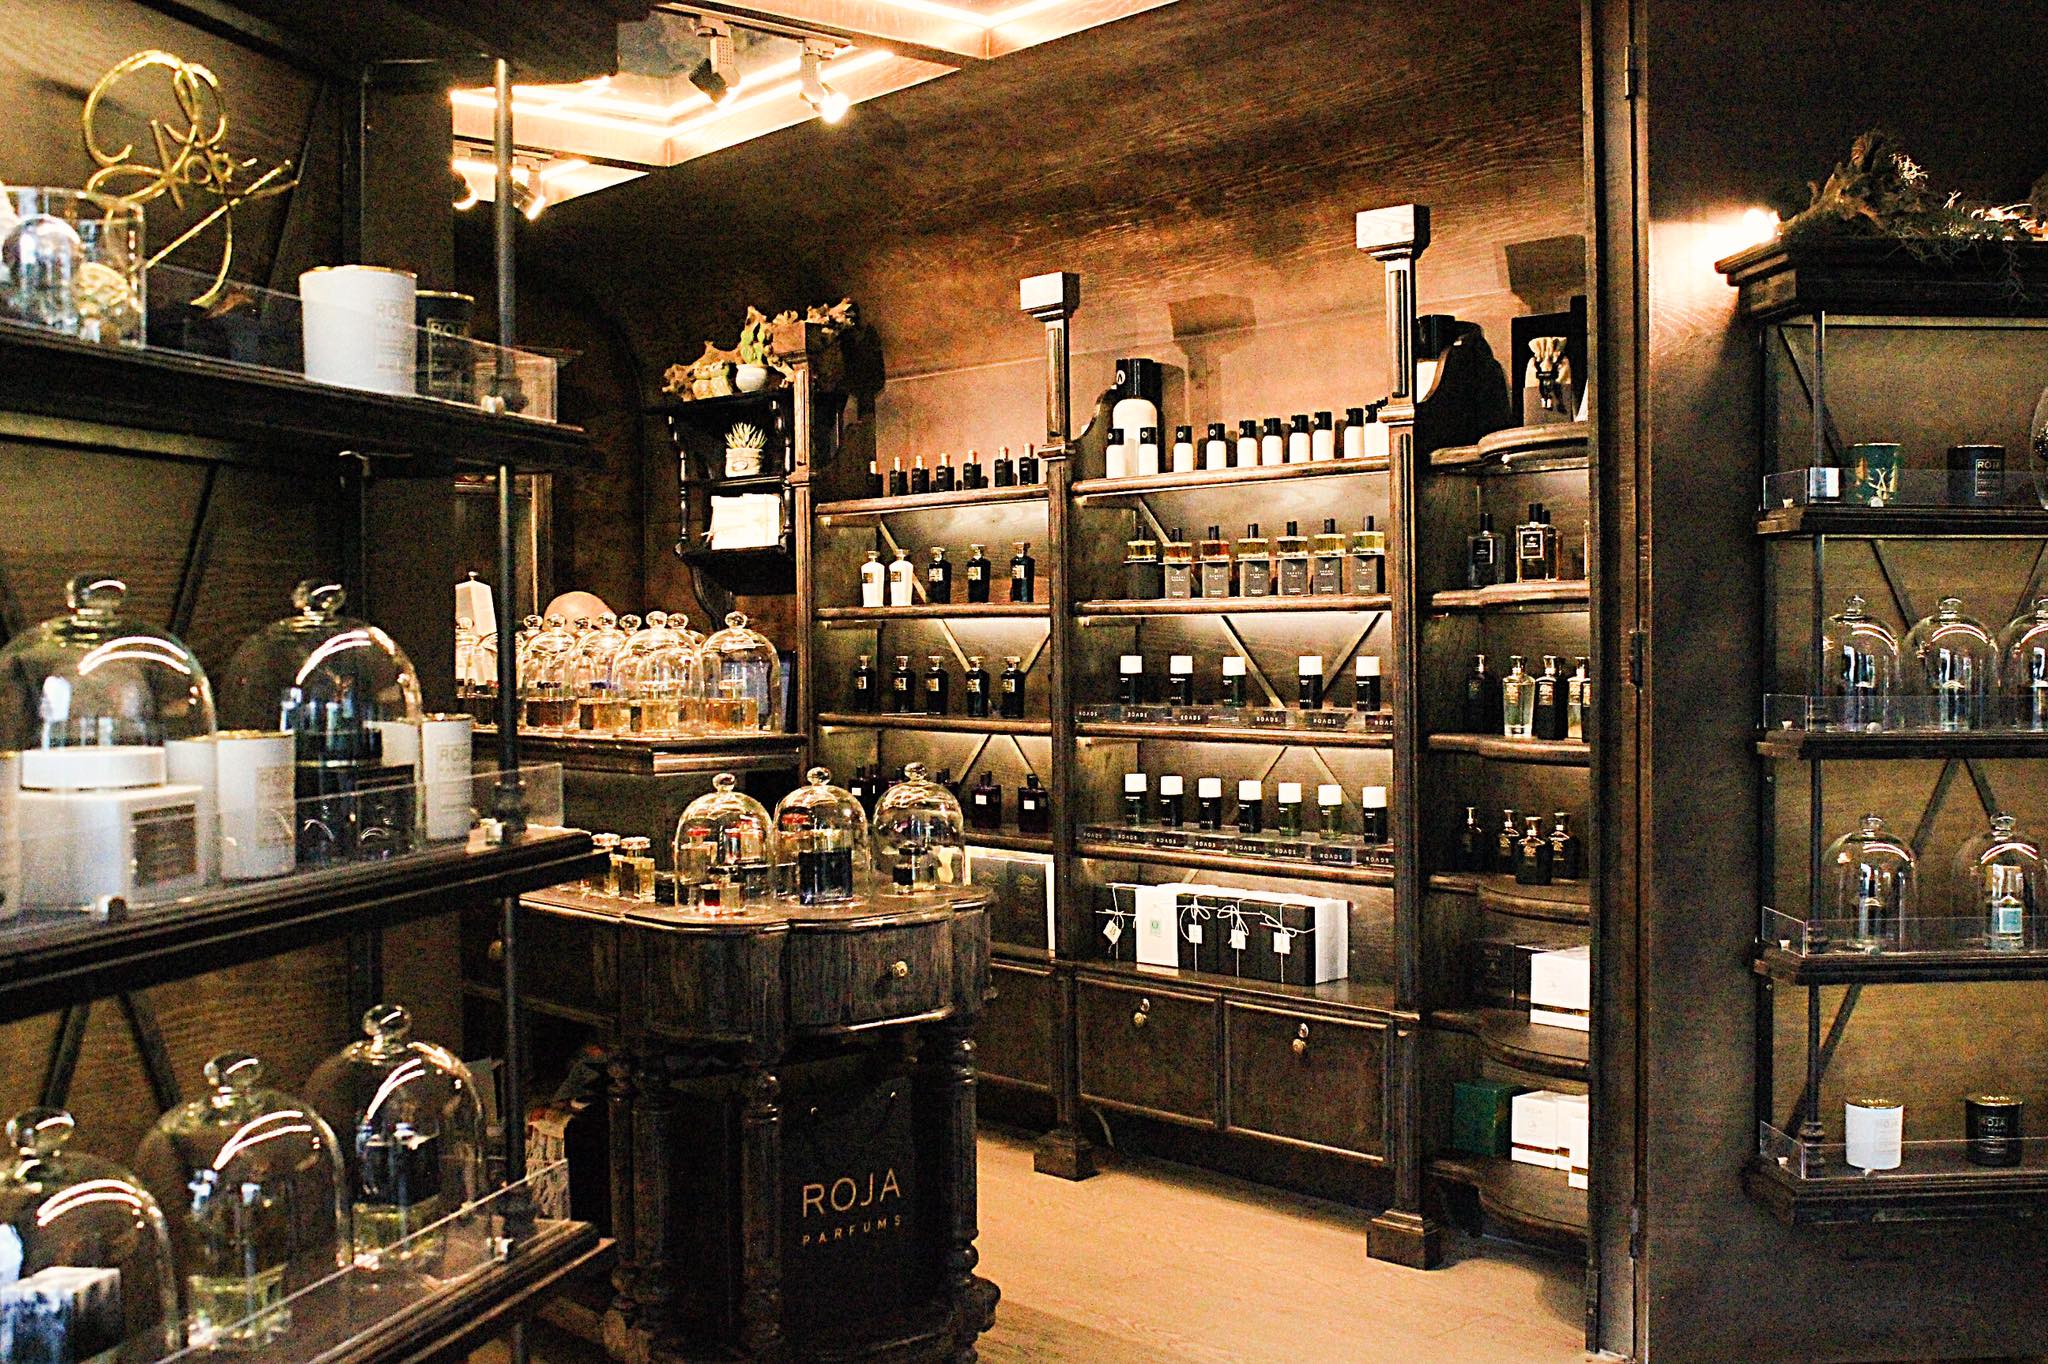 Niche perfume is a rare and hard-to-find mecca for scent followers